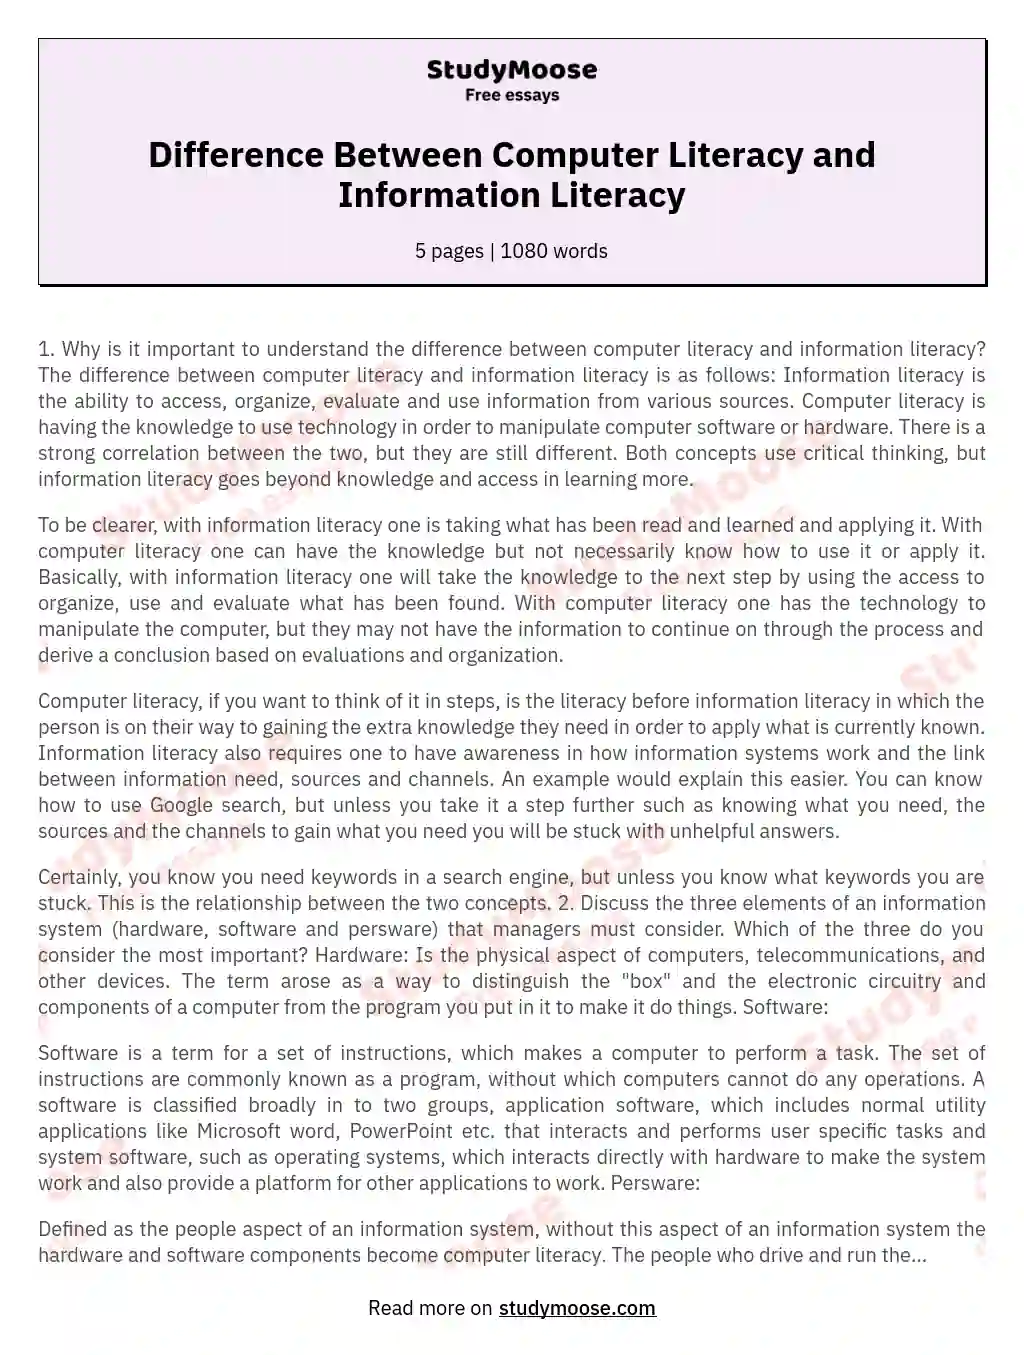 Difference Between Computer Literacy and Information Literacy essay